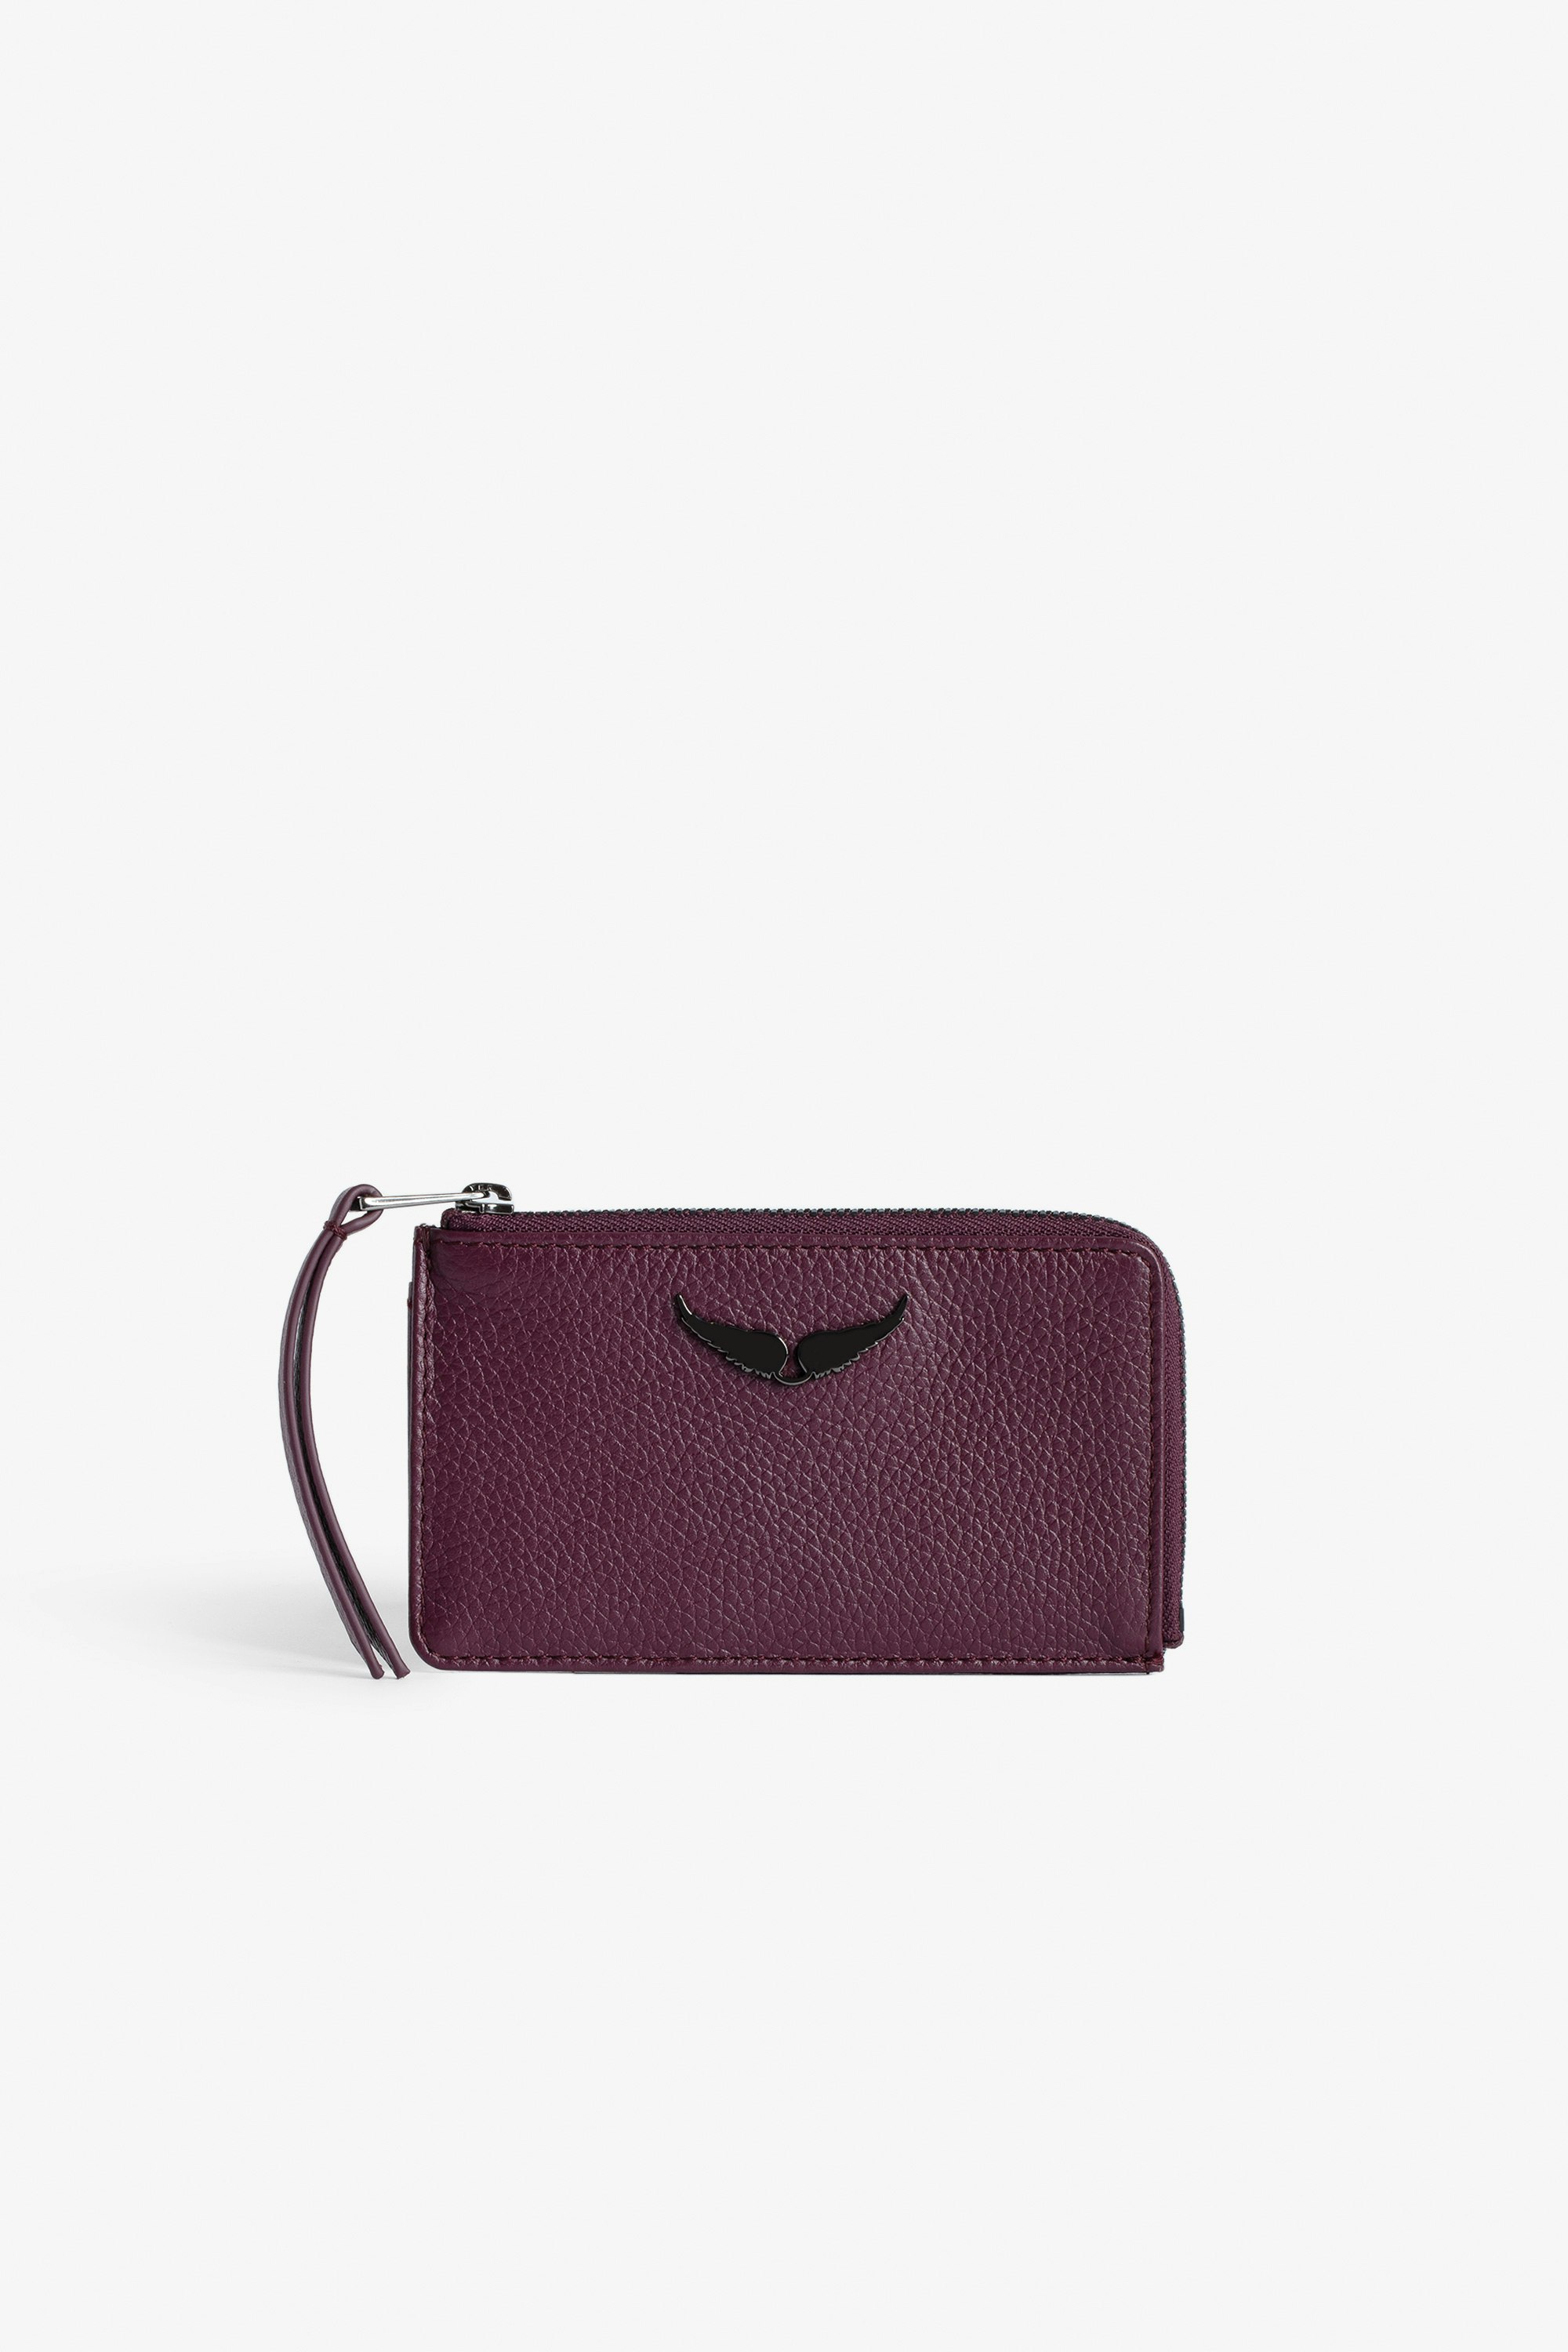 ZV Card 財布 Women’s burgundy grained leather card holder with wings charm.